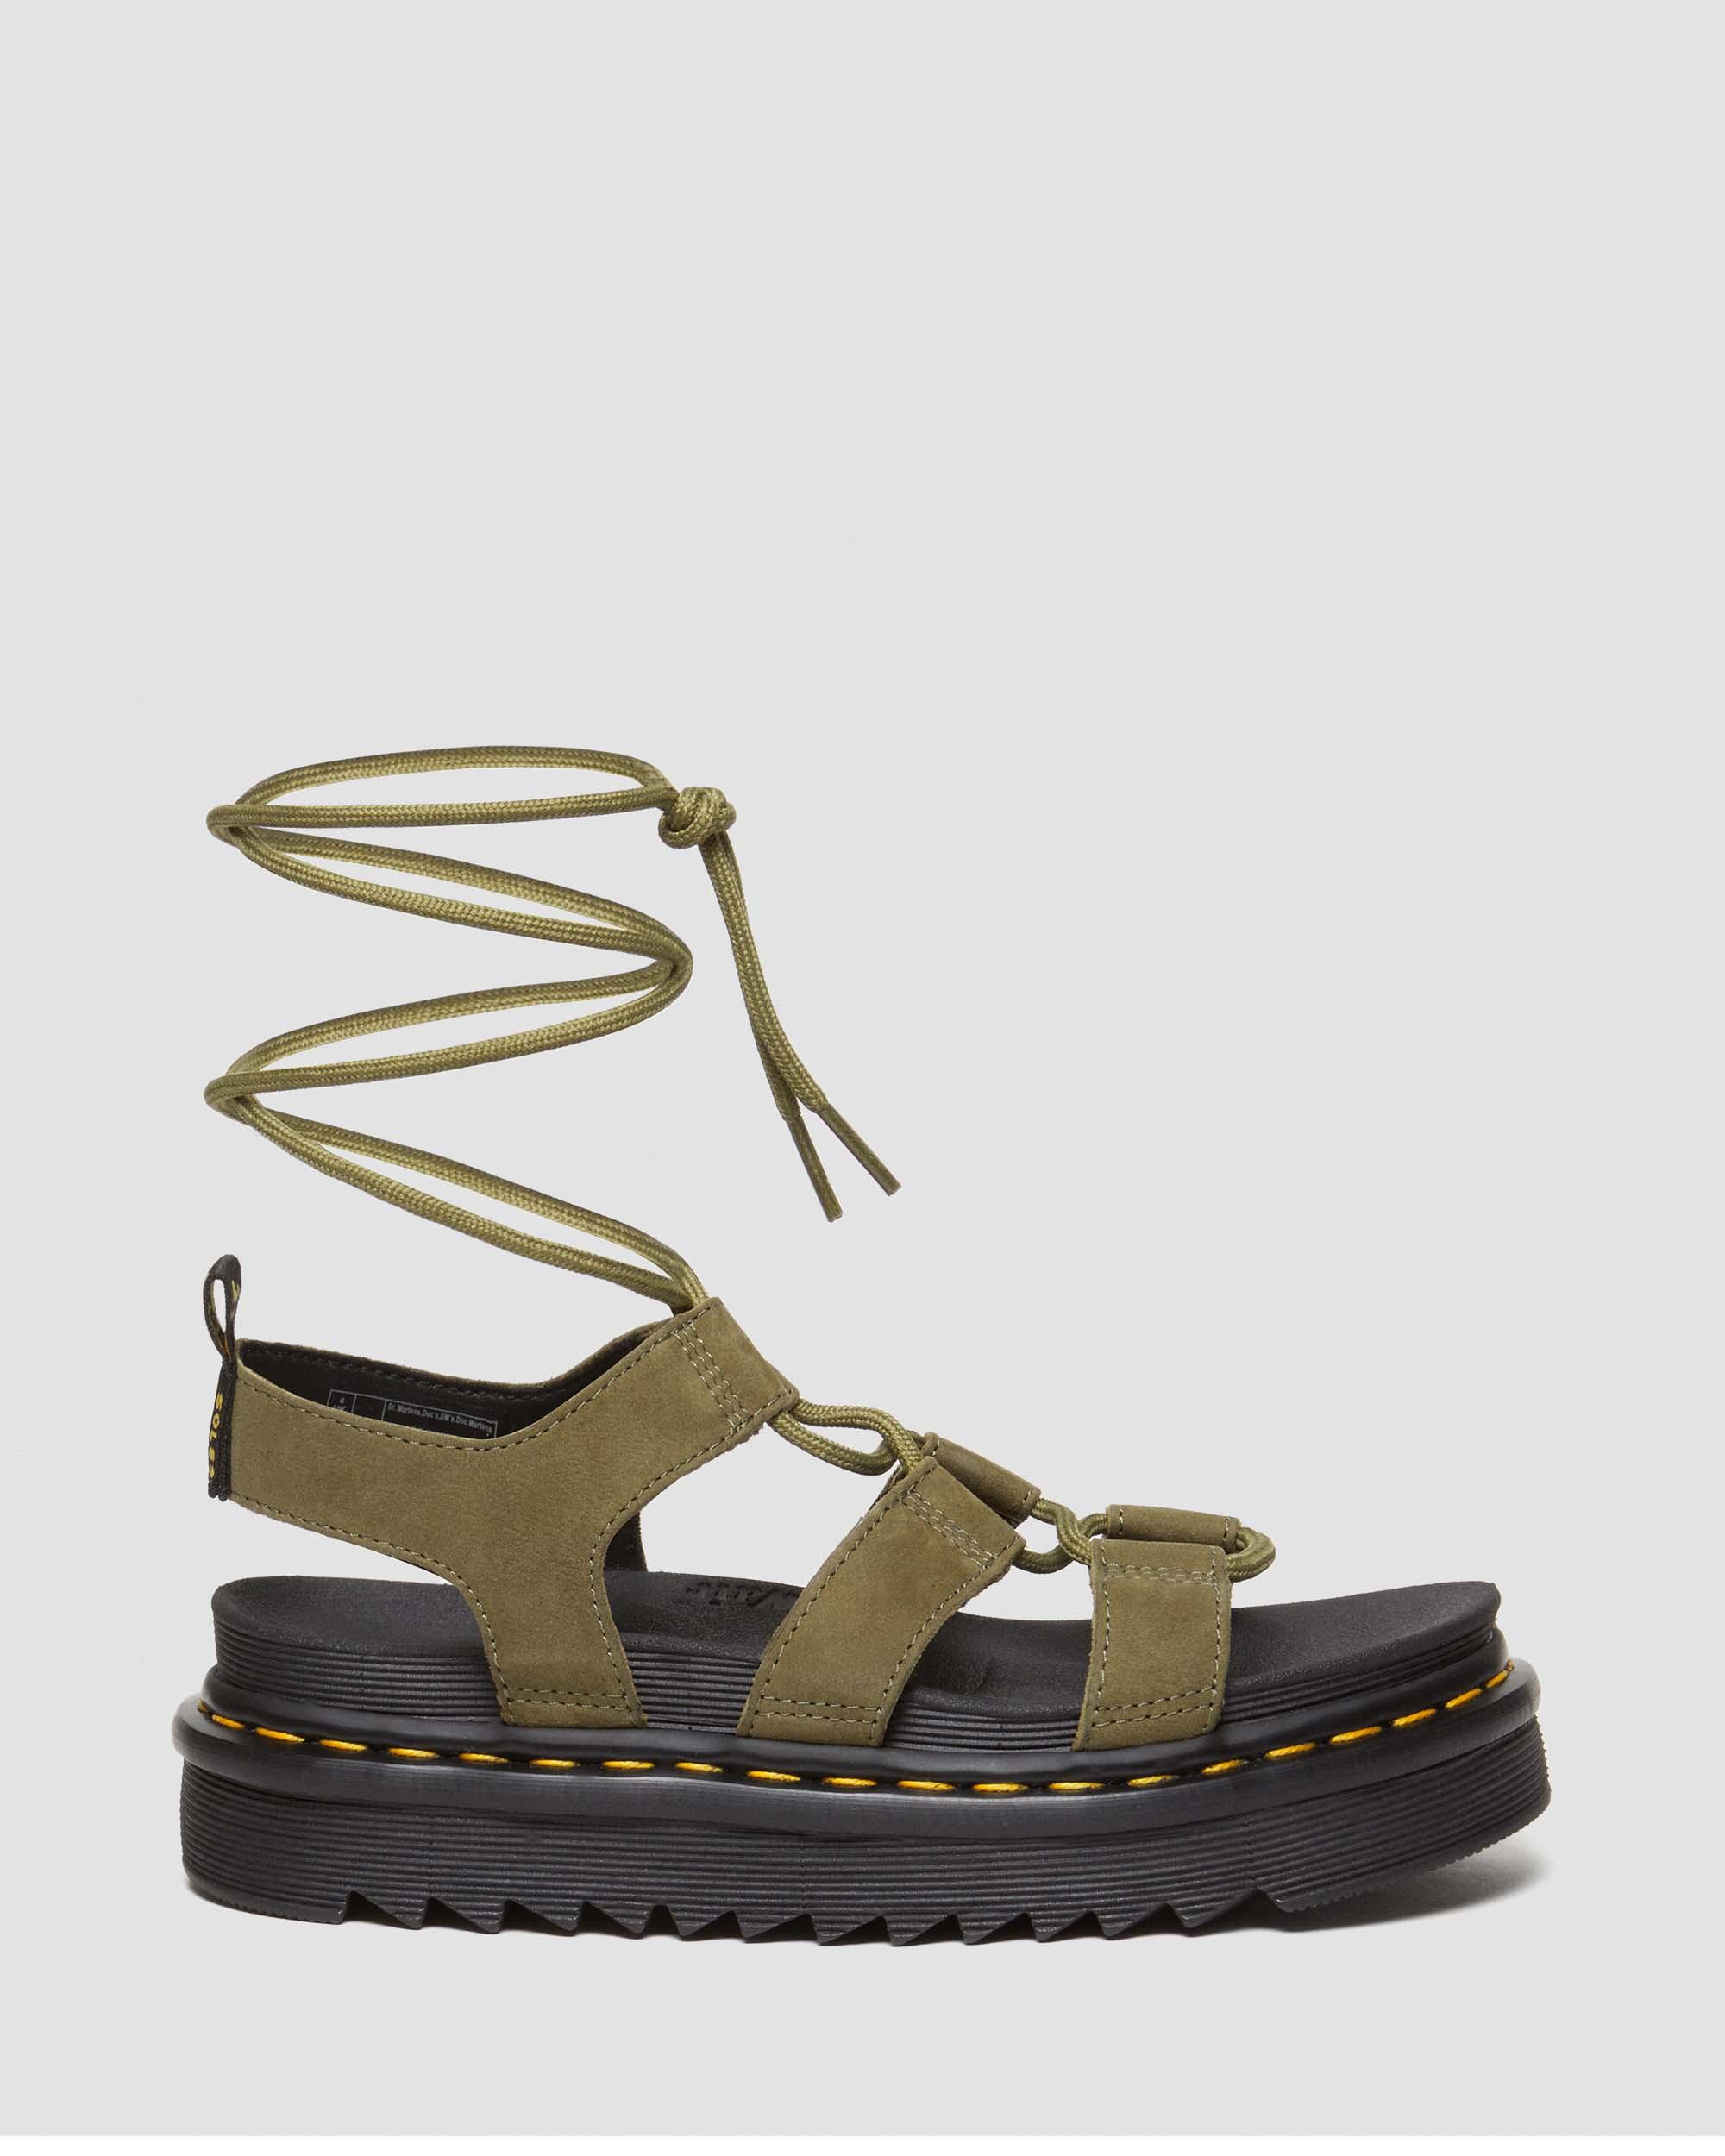 Nartilla Tumbled Nubuck Leather Gladiator Sandals in Muted Olive